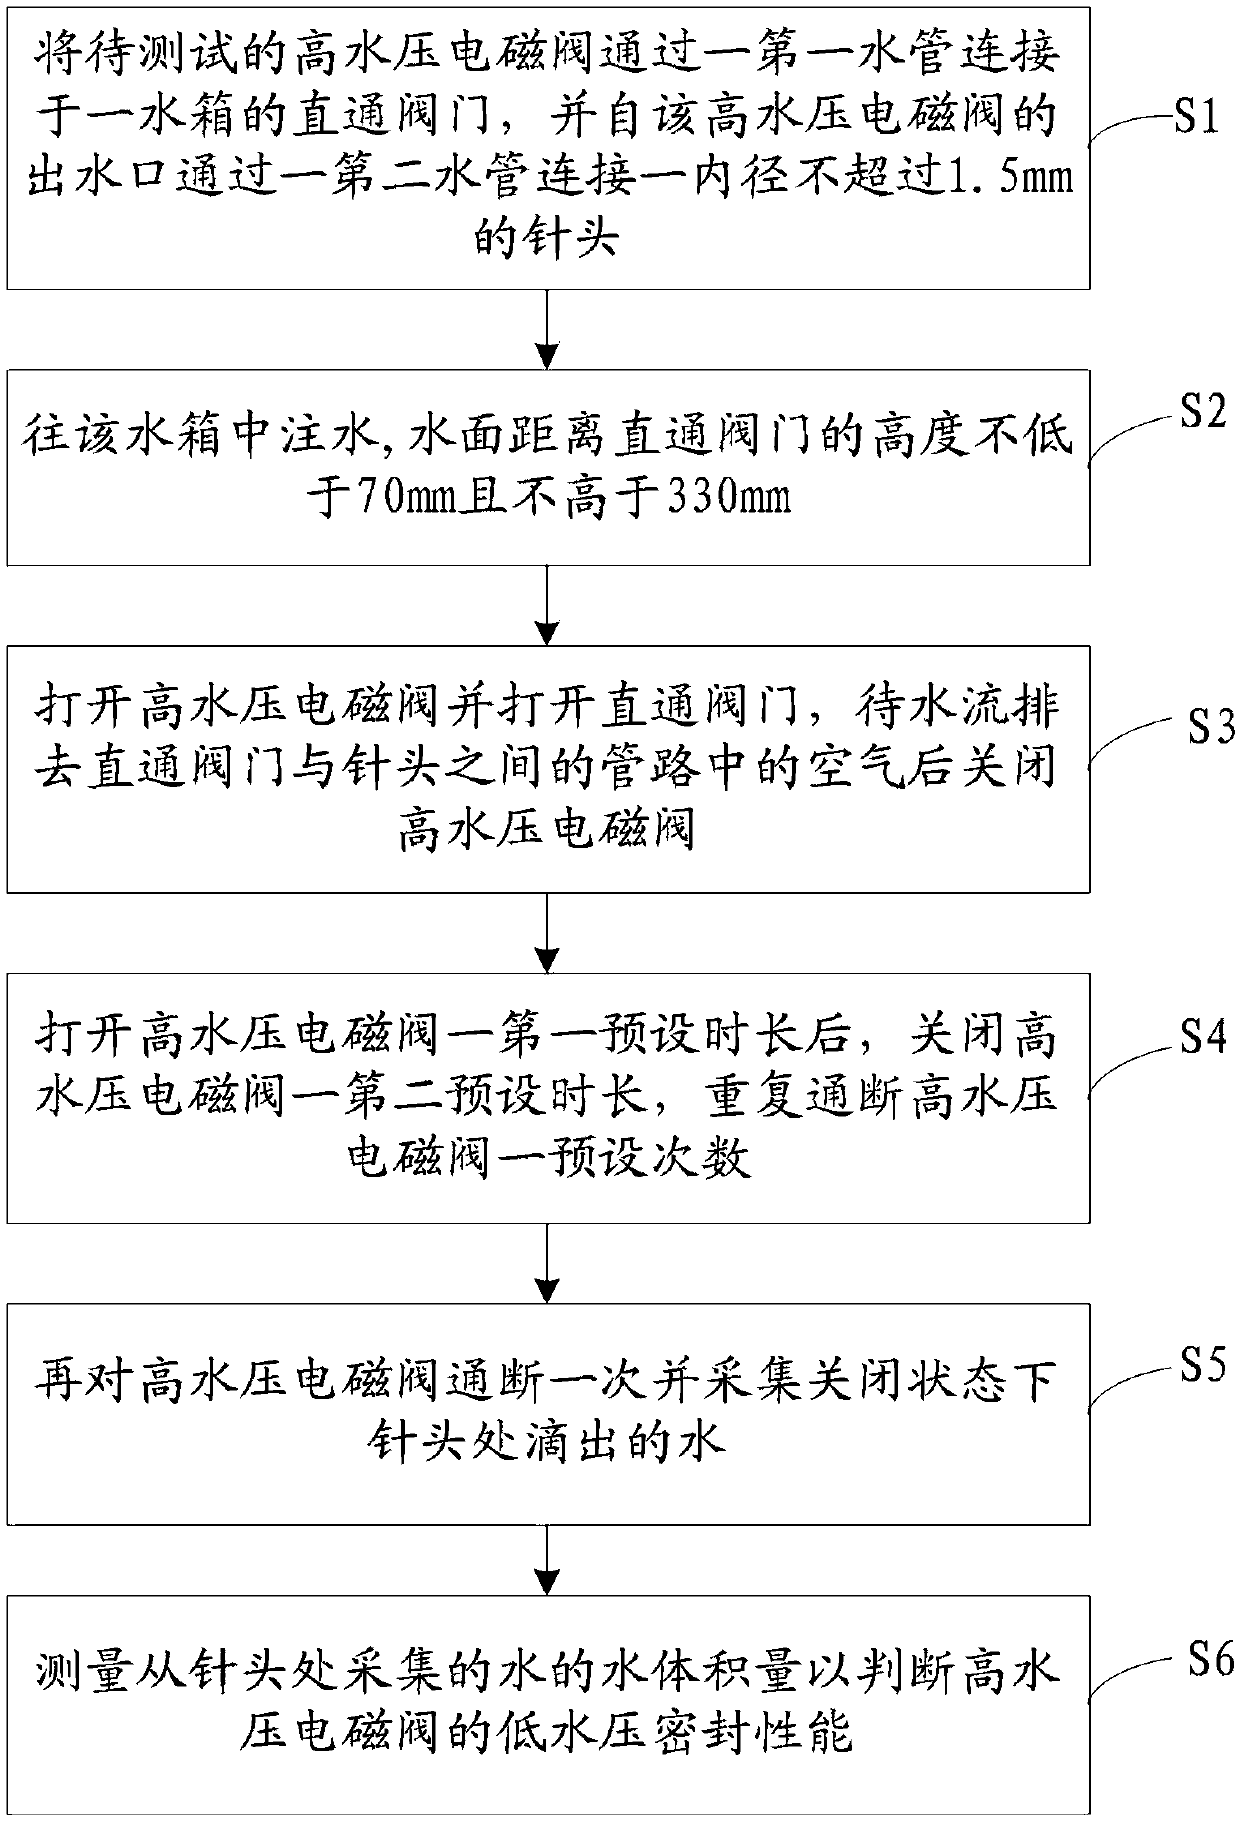 Low-water pressure sealing performance test method and system for high-water pressure solenoid valve